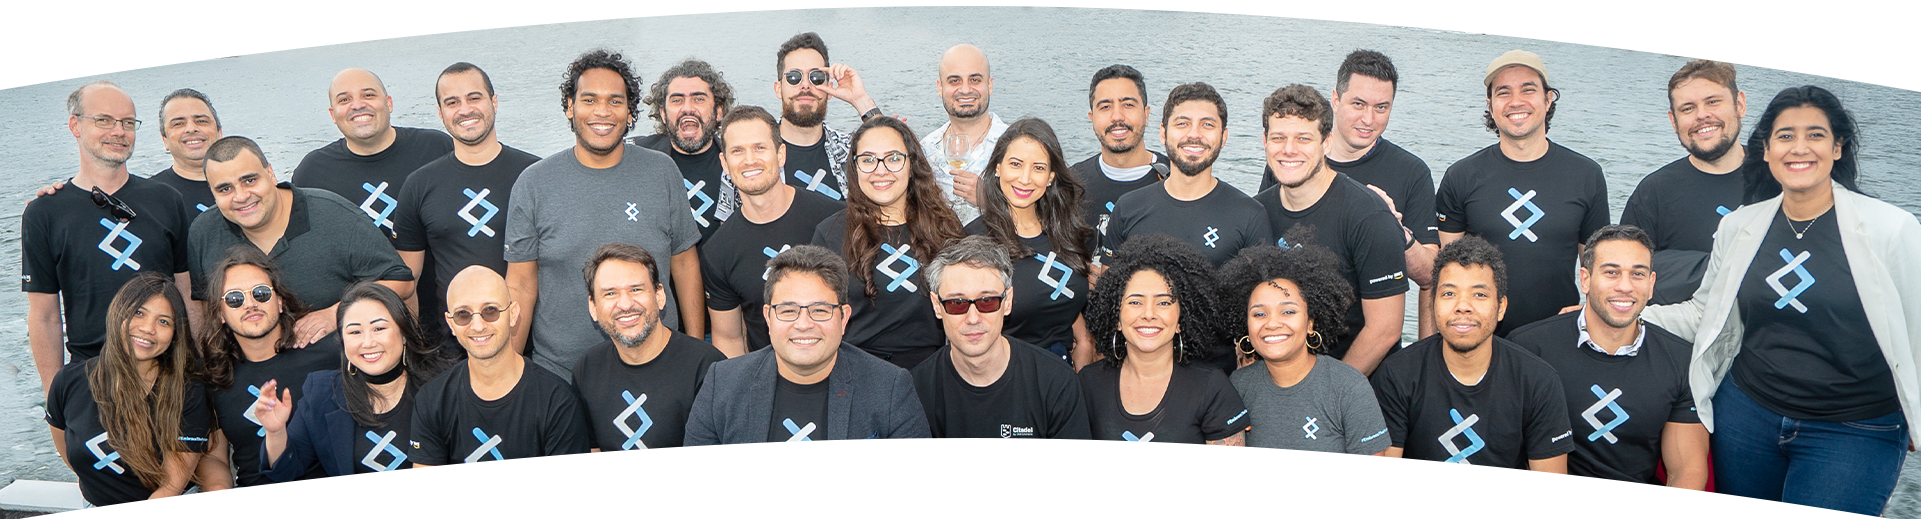 About DNX Solutions Team